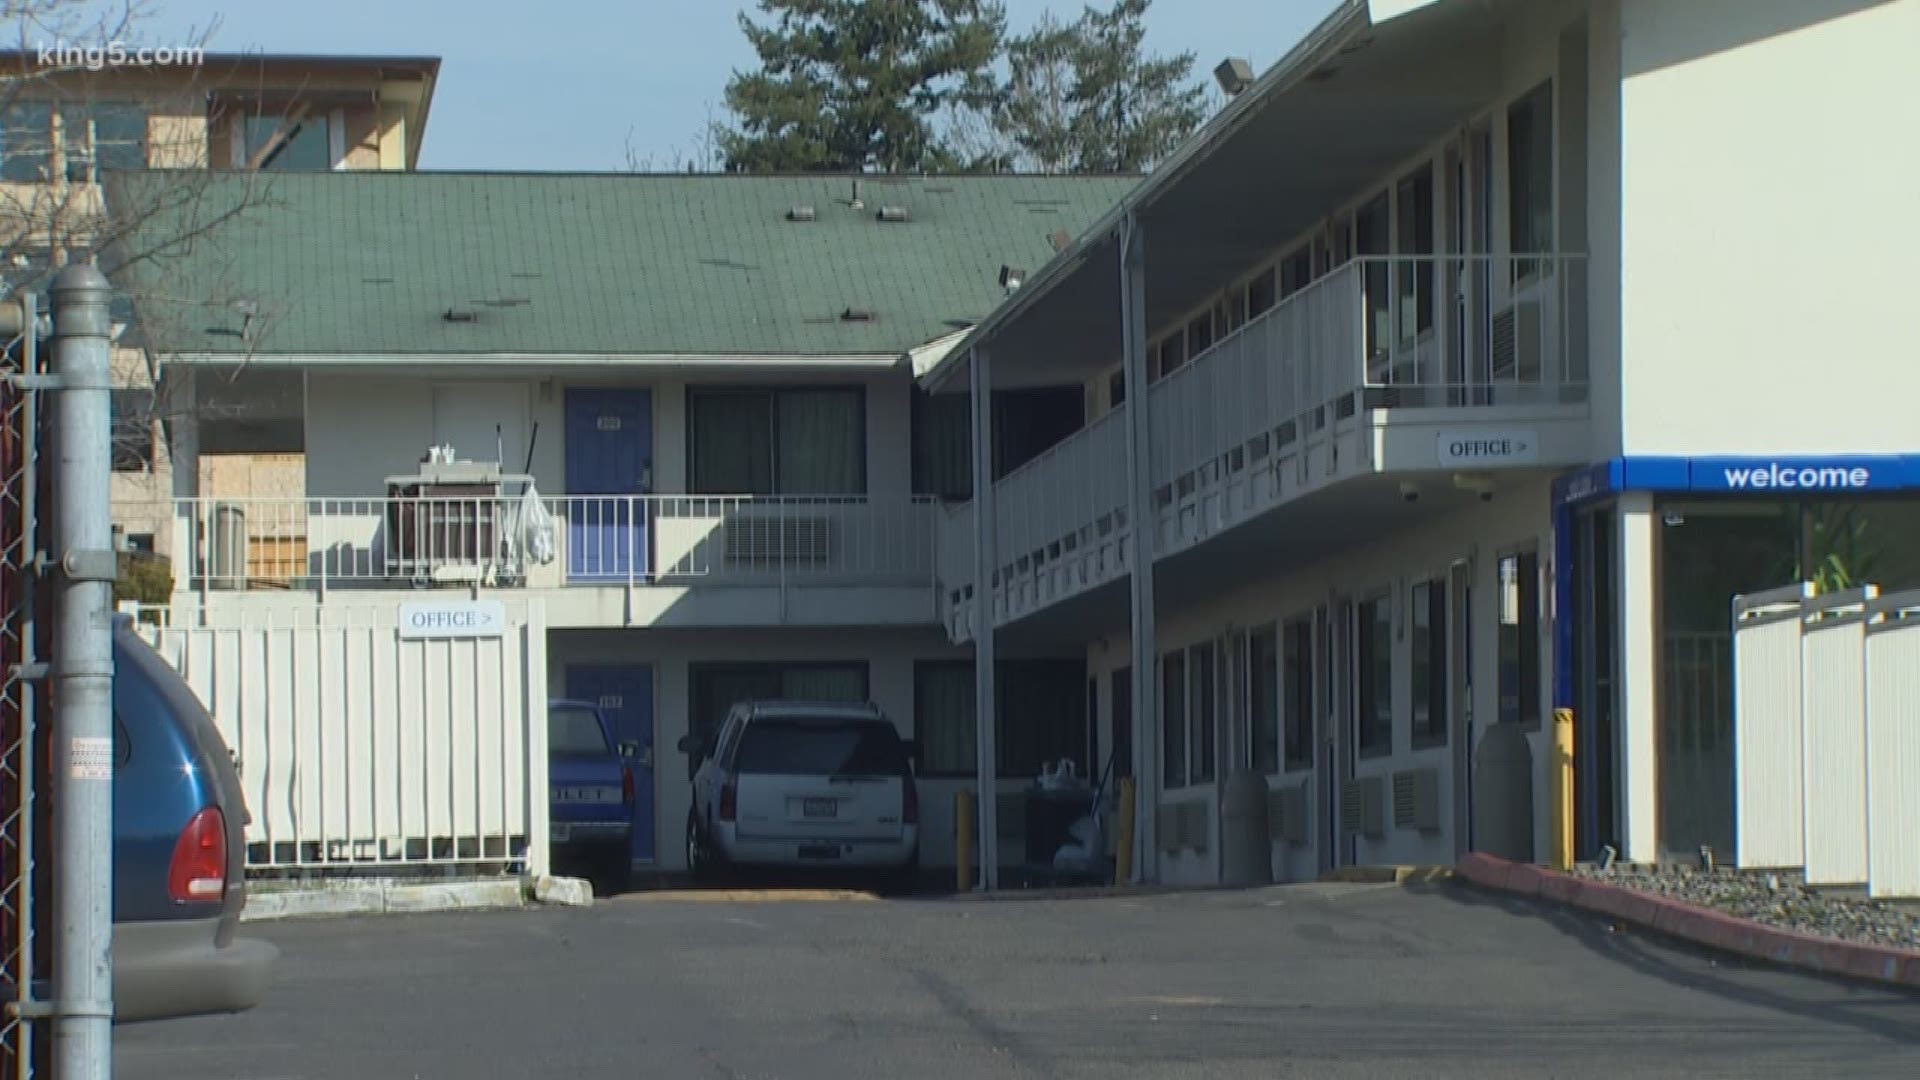 A handful of Motel 6 locations from Issaquah to Bellingham are shut down, at least temporarily, threatening to put many out on the street.